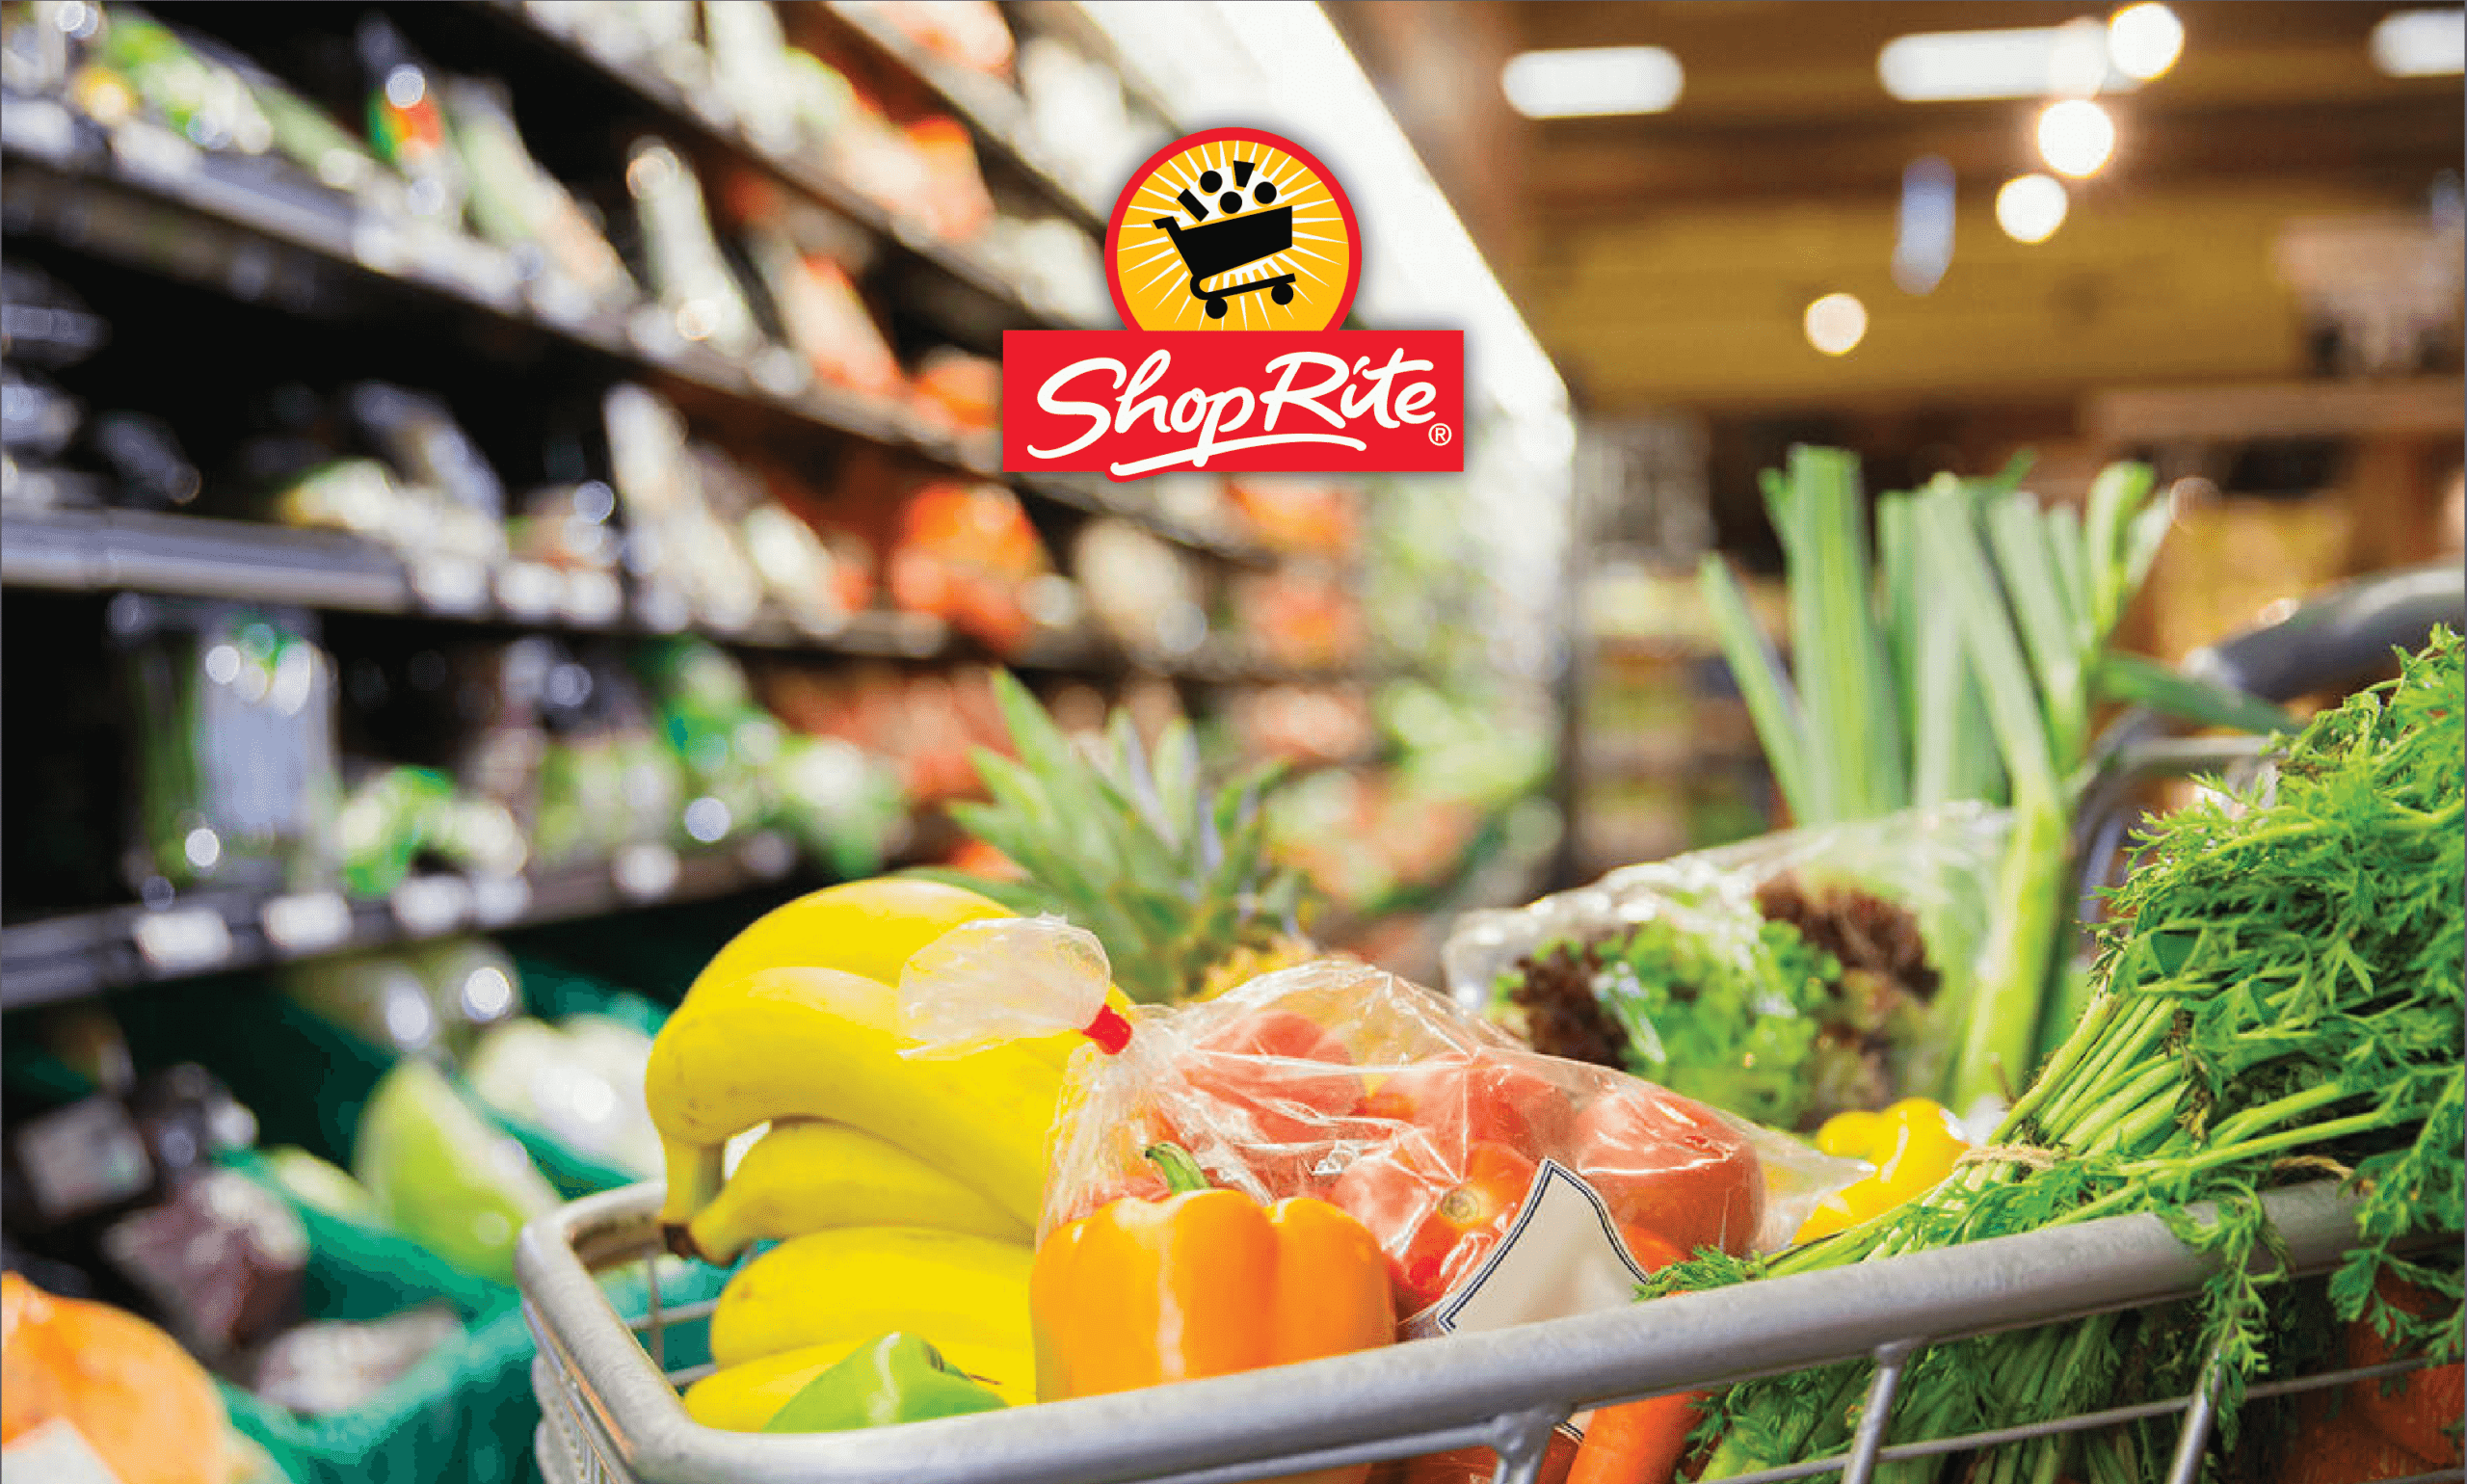 A grocery cart full of fresh vegetables with the ShopRite logo above